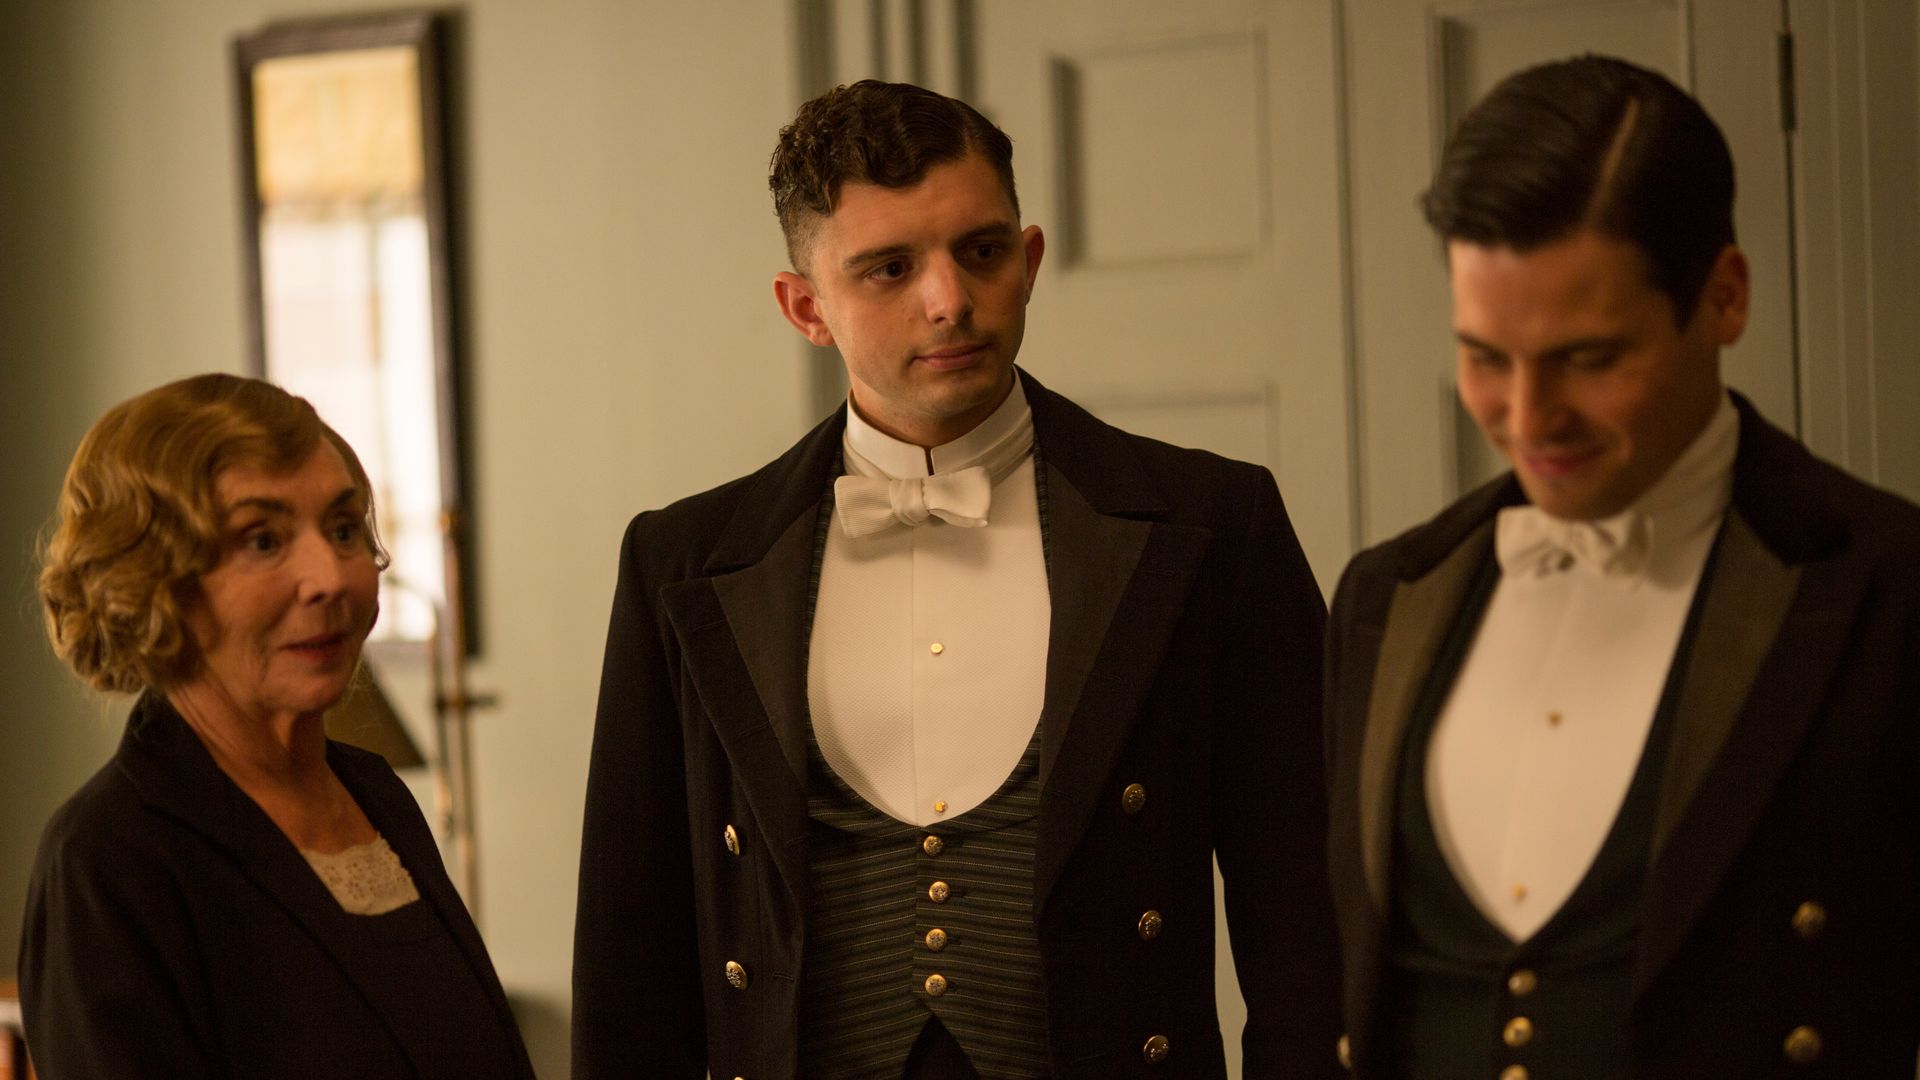 SUE JOHNSTON as Denker. MICHAEL FOX as Andy and ROBERT JAMES-COLLIER as Thomas in Downton Abbey

